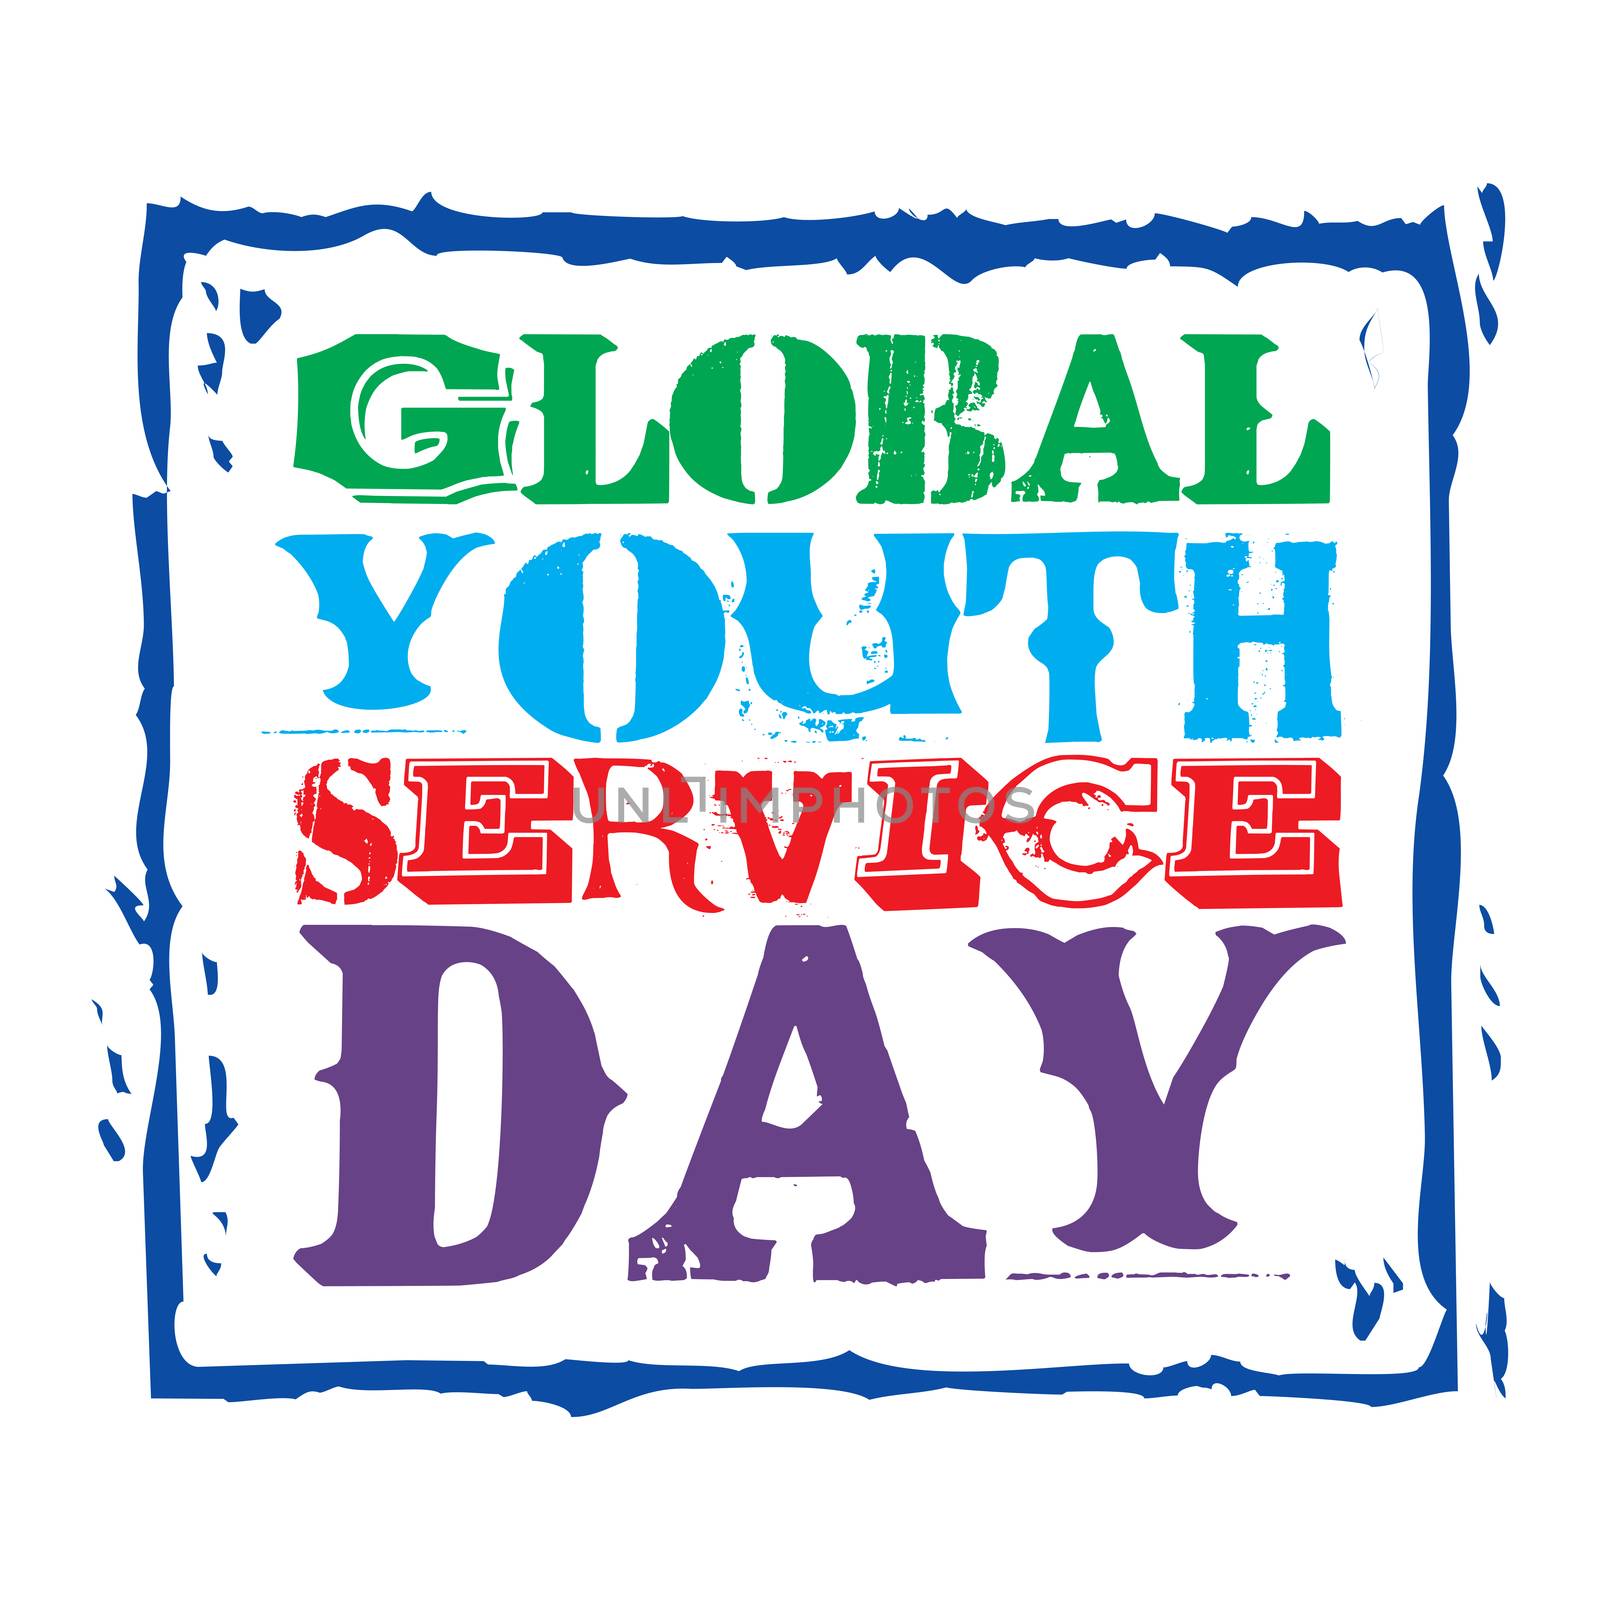 Global Youth Service Day by tharun15